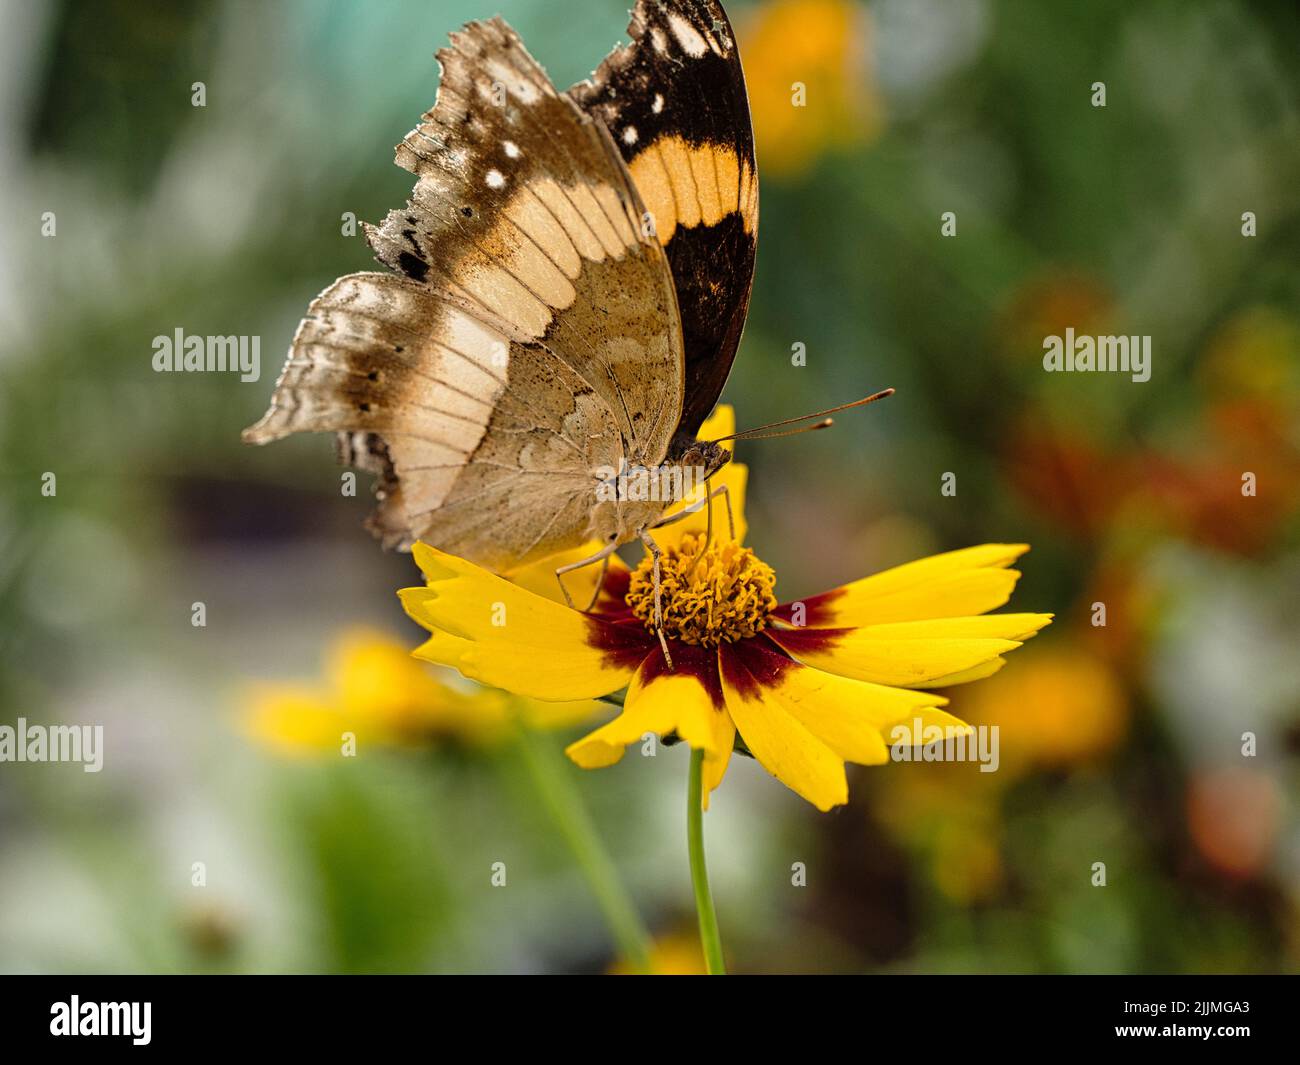 A macro shot of a beautiful butterfly sipping nectar from a yellow flower against a blurred background Stock Photo